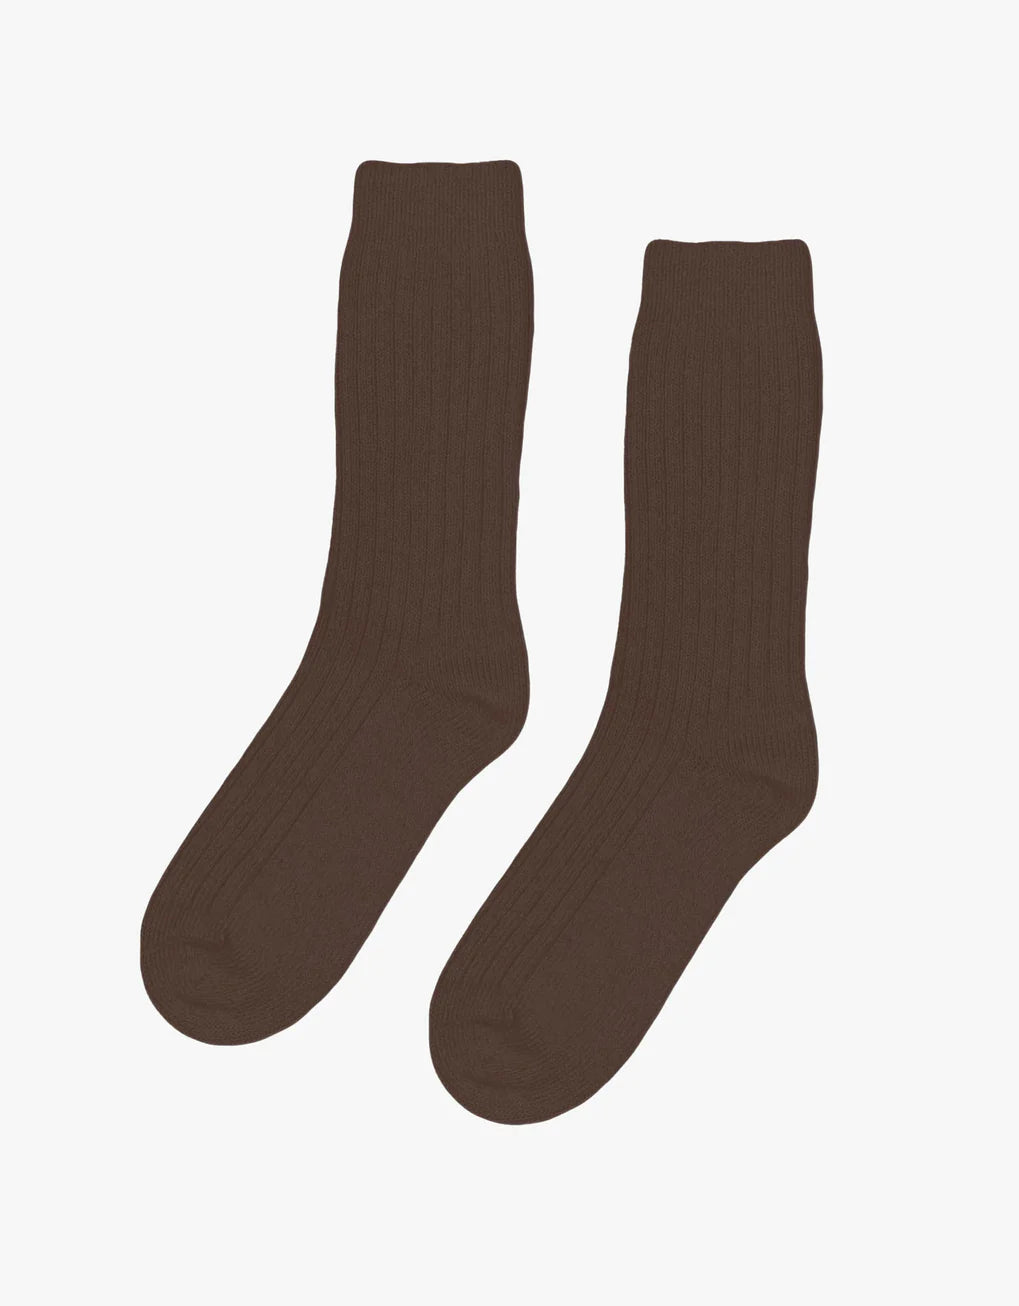 A pair of Colorful Standard Merino Wool Blend Socks on a white background.